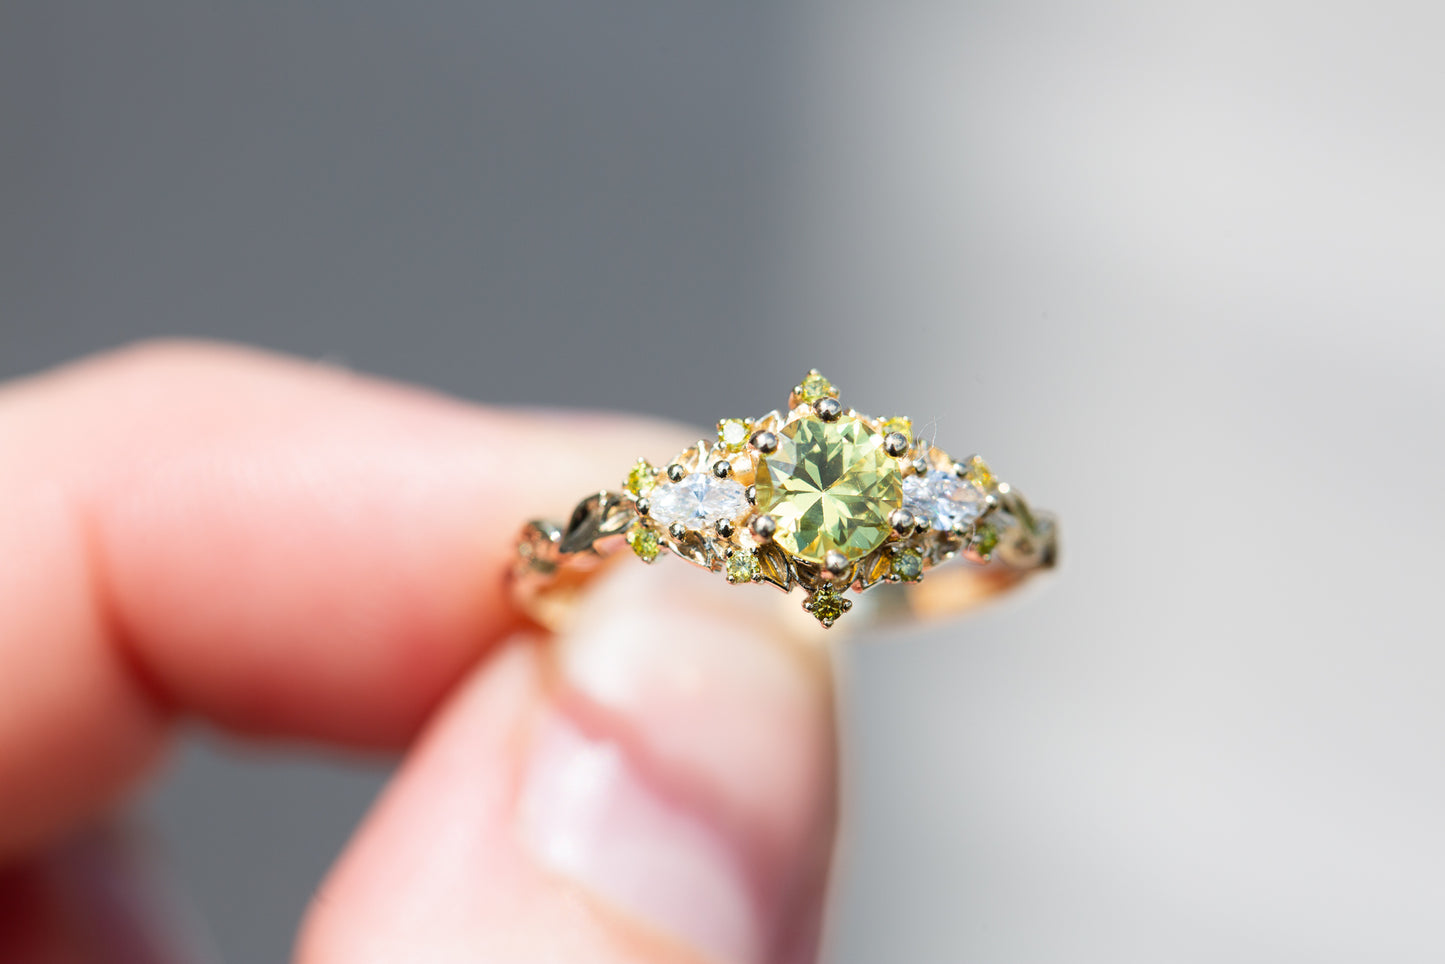 Chandelier Yellow Sapphire Ring - Engagement Ring